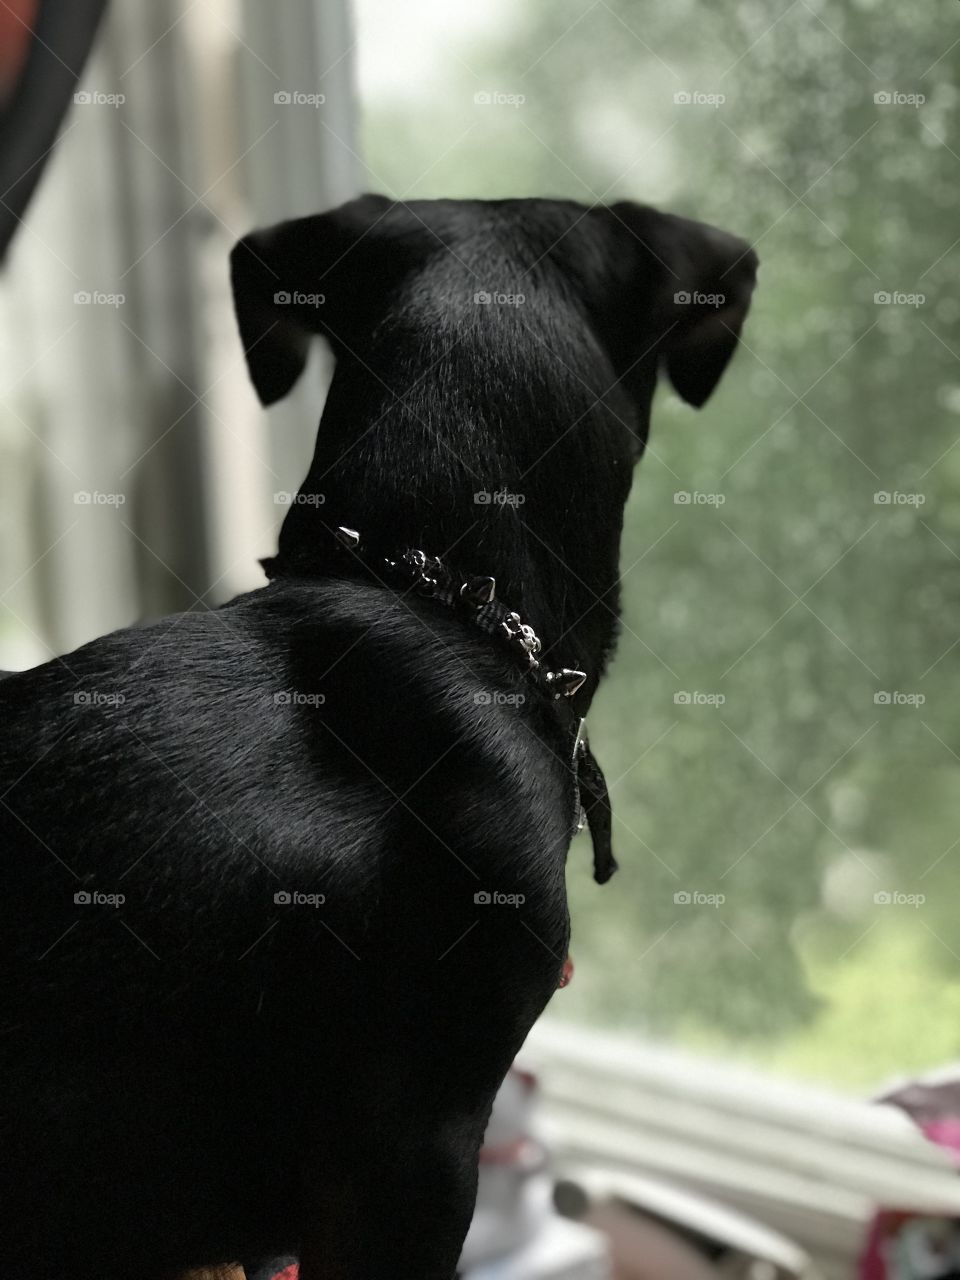 Luna loves to stare outside because the world is very big for a runt.